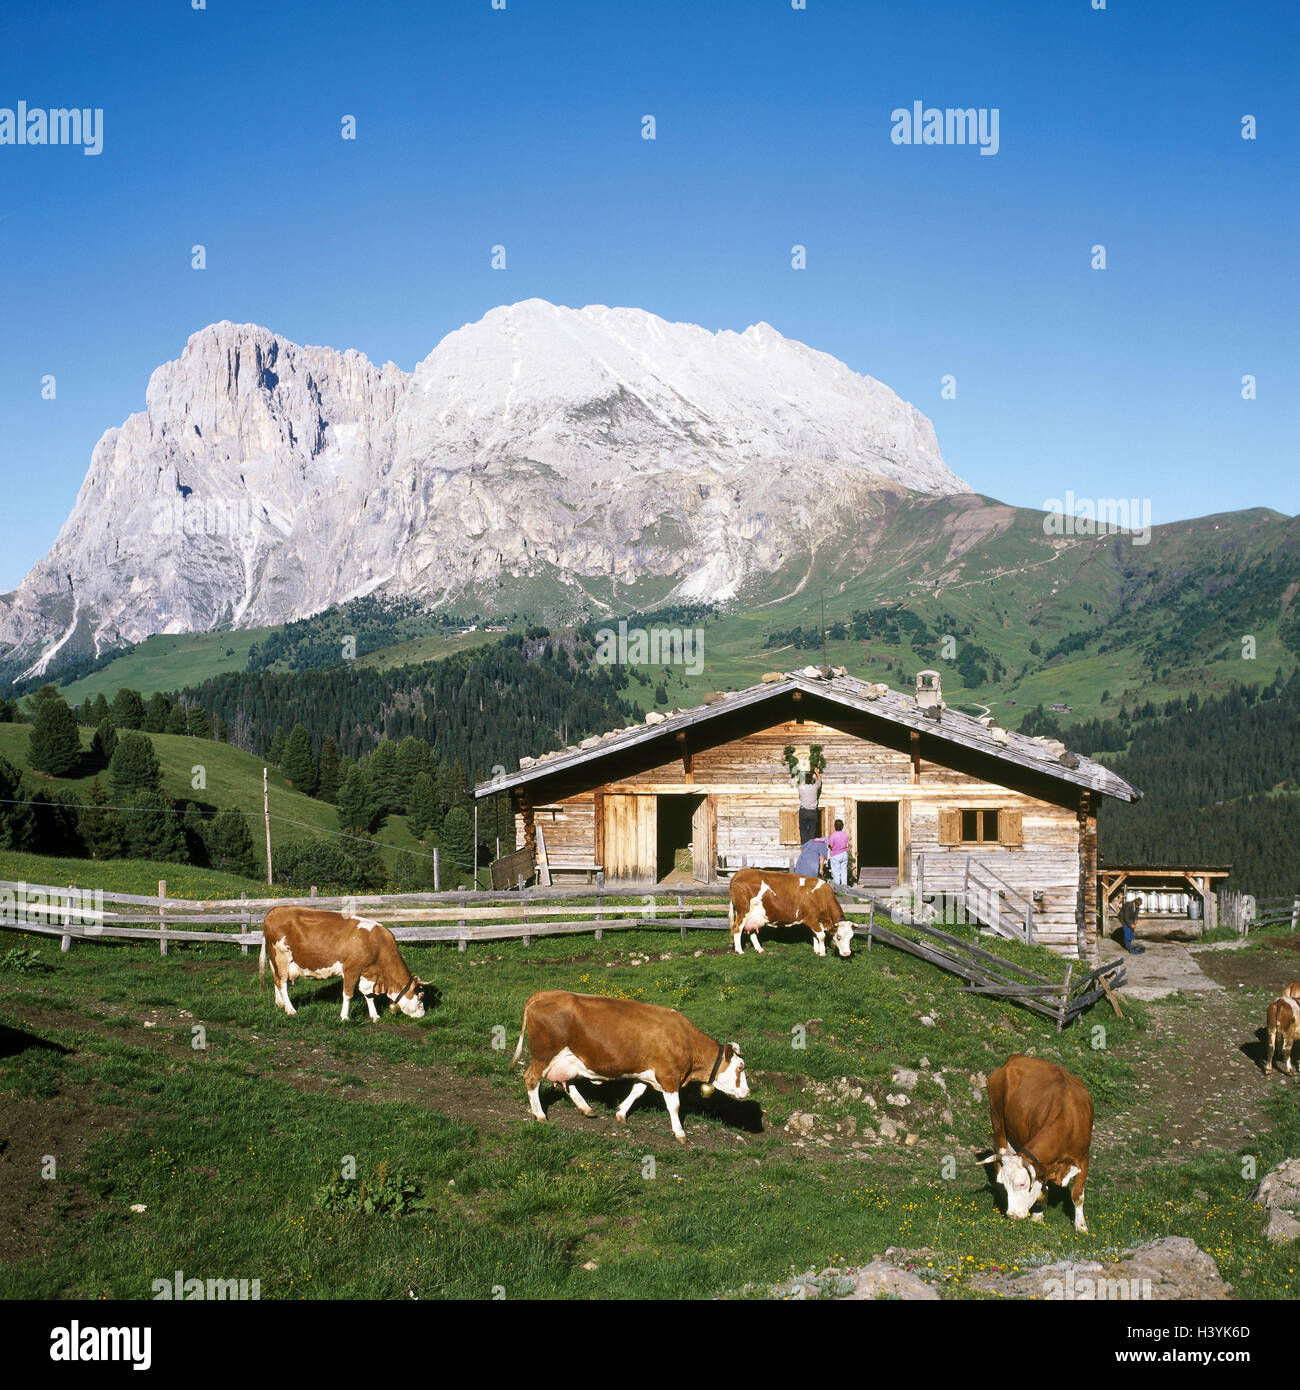 Italy, South Tyrol, the Dolomites, region Seiser alp, alpine hut, cows, Europe, alps, south alps, mountain landscape, mountains, mountains, scenery, alp, alp company, cattles, hut, cattle ranching, benefit animals Stock Photo